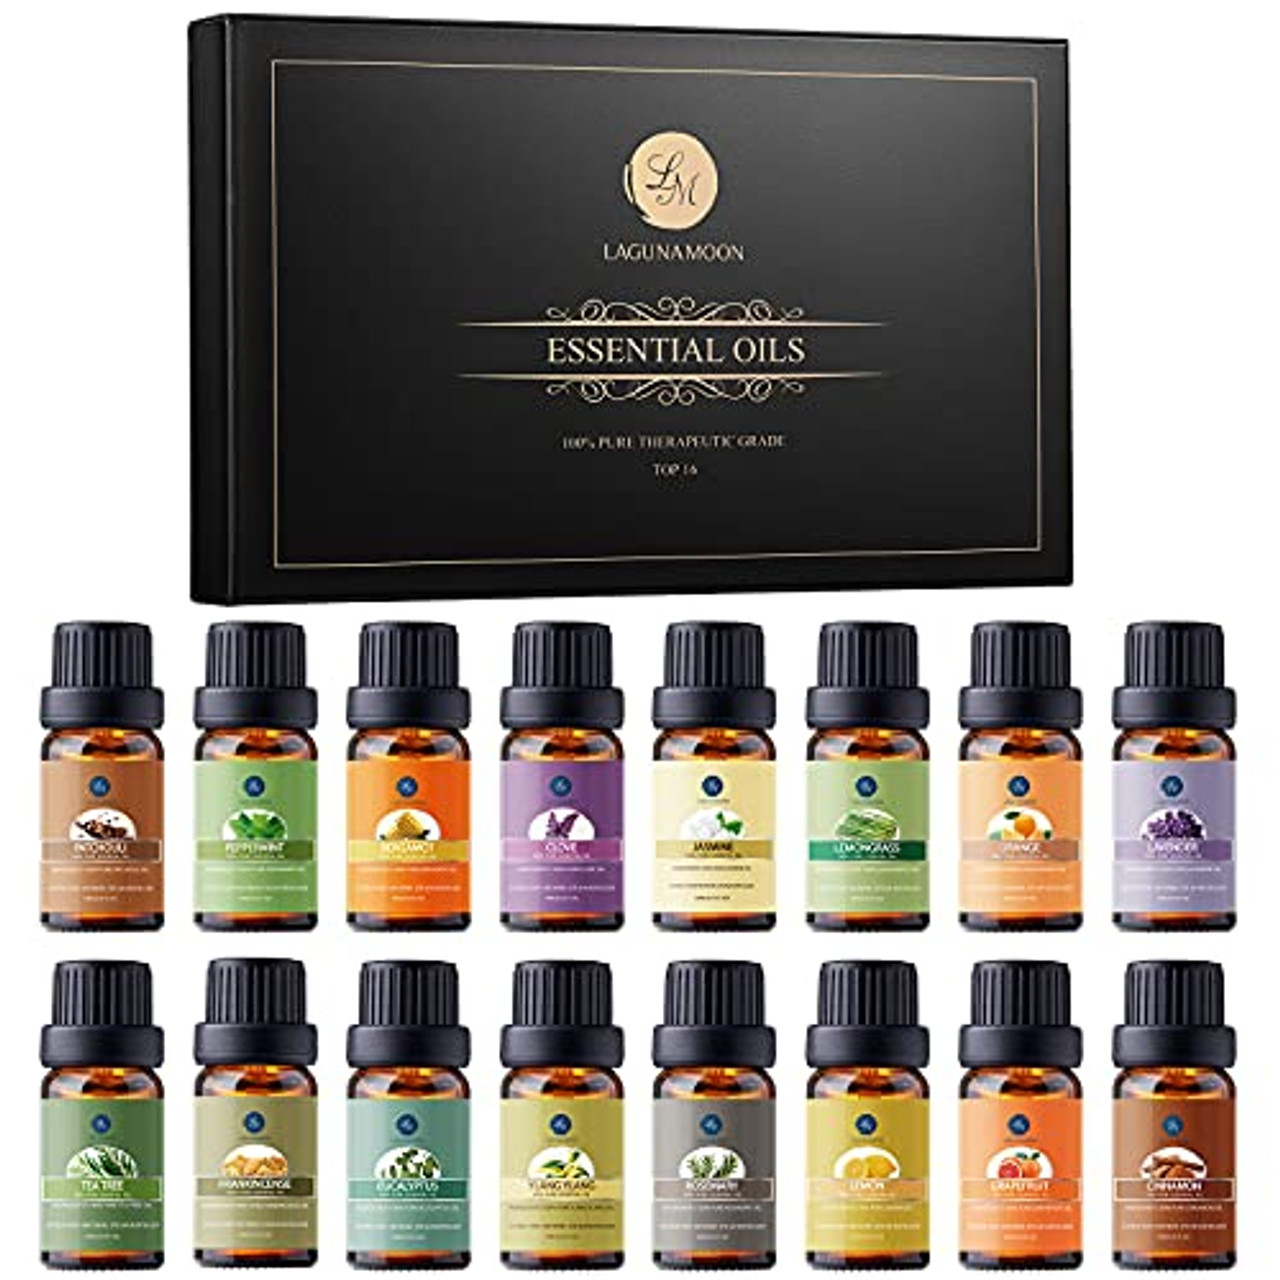 The Best Essential Oils Gift Sets of 2020